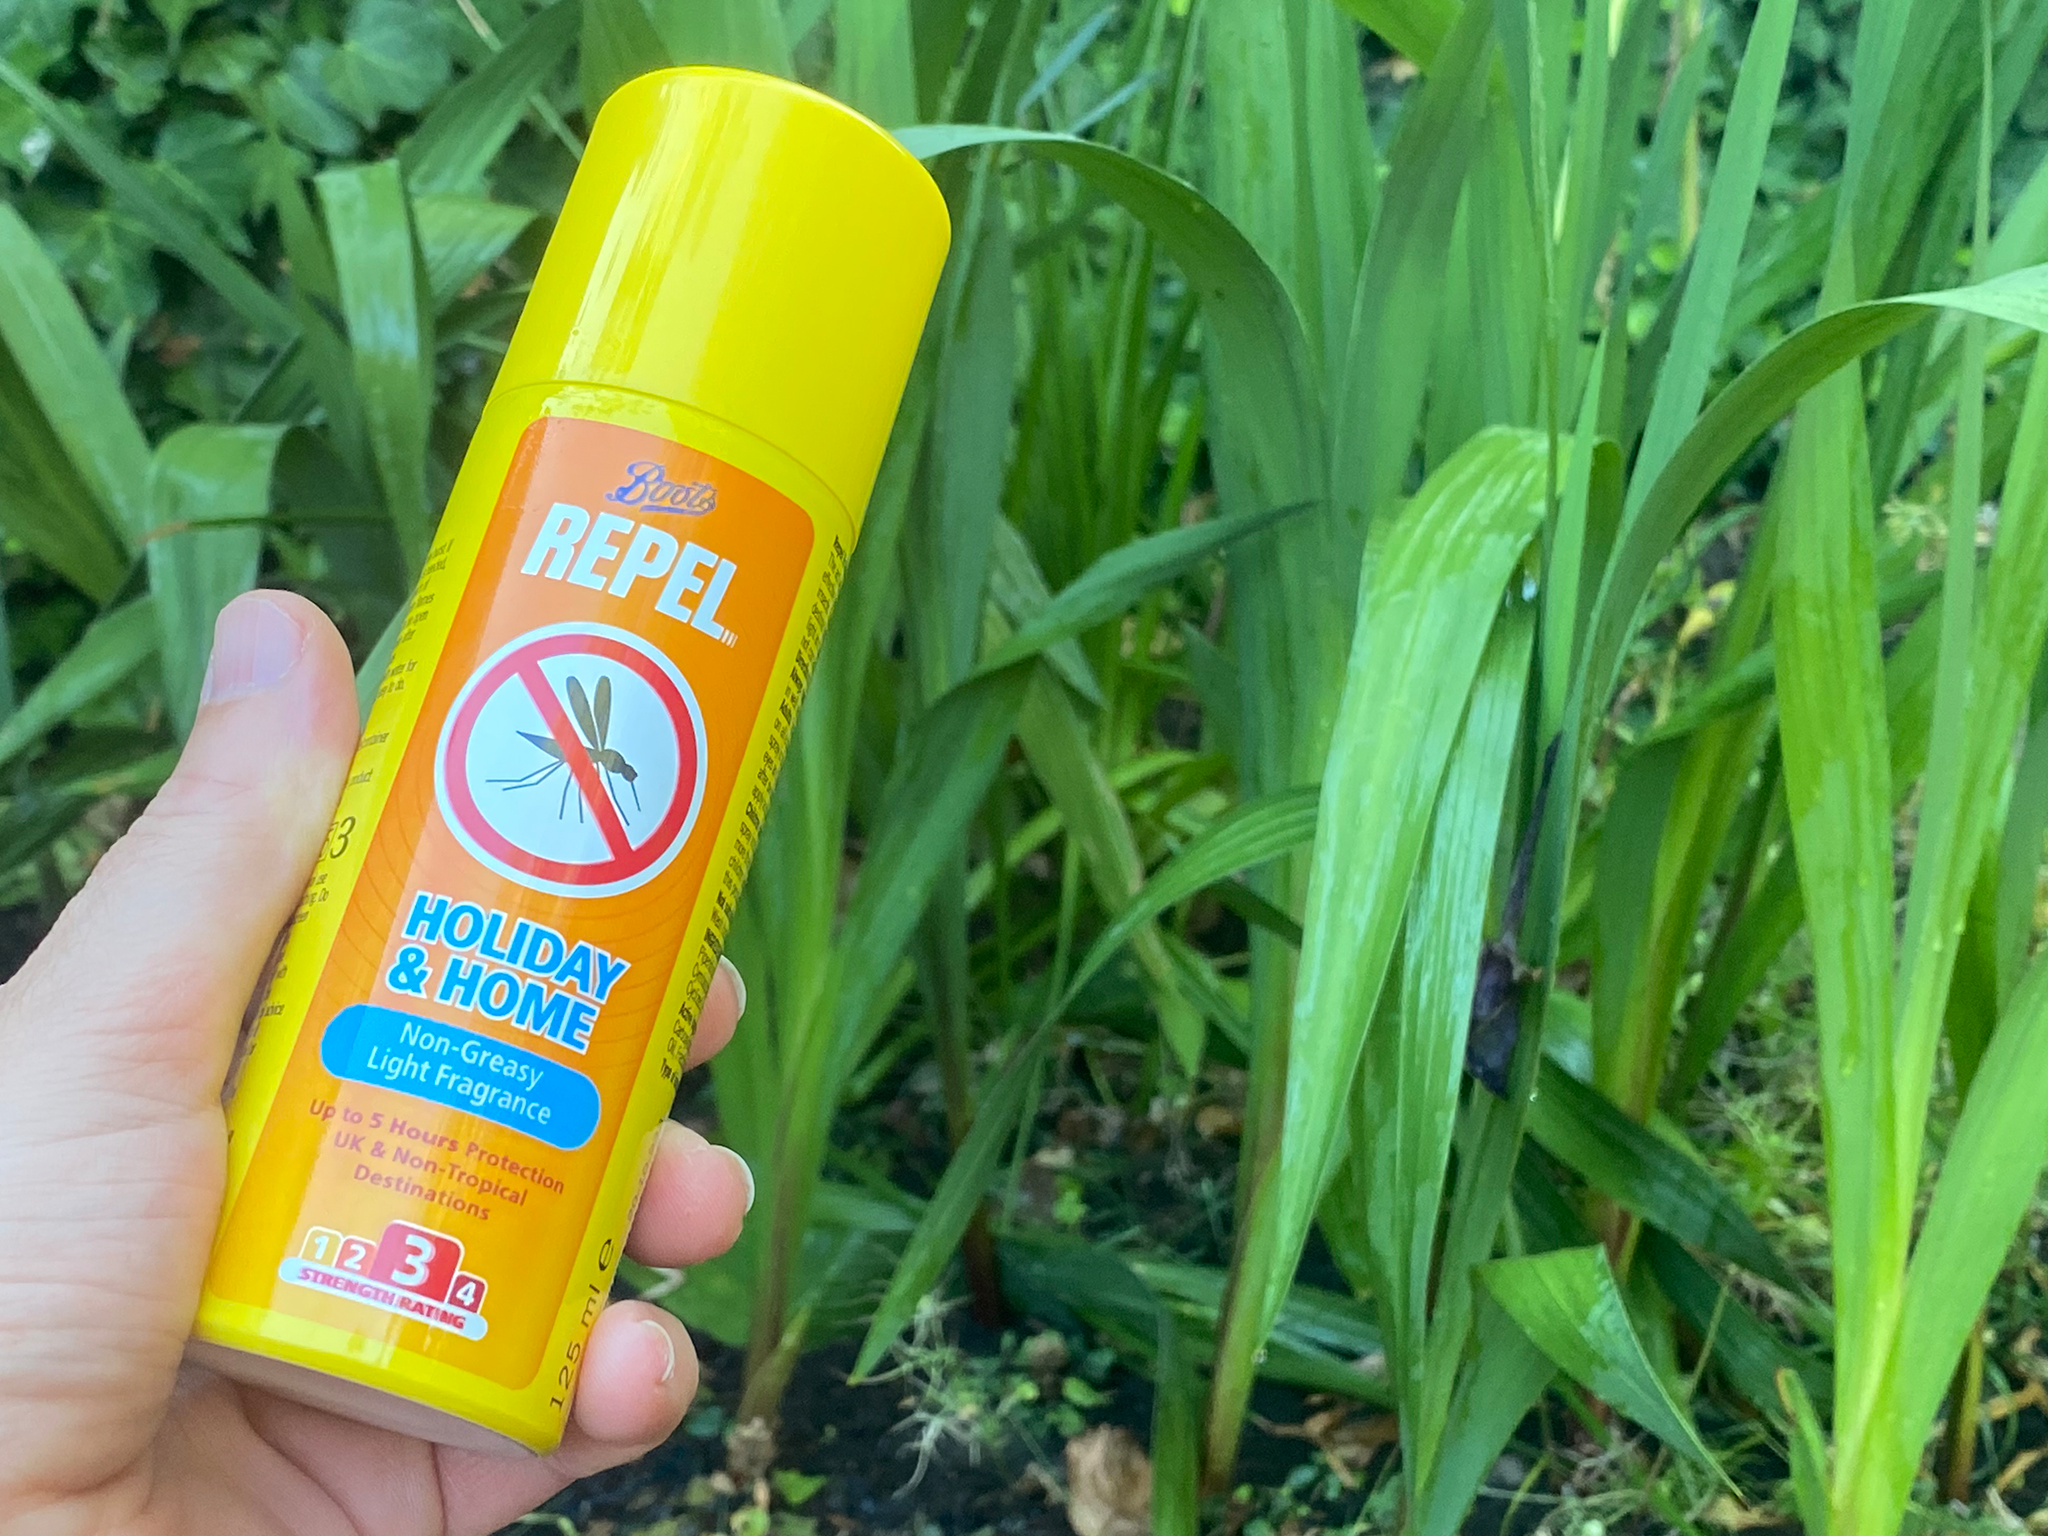 Boots repel holiday and home aerosol